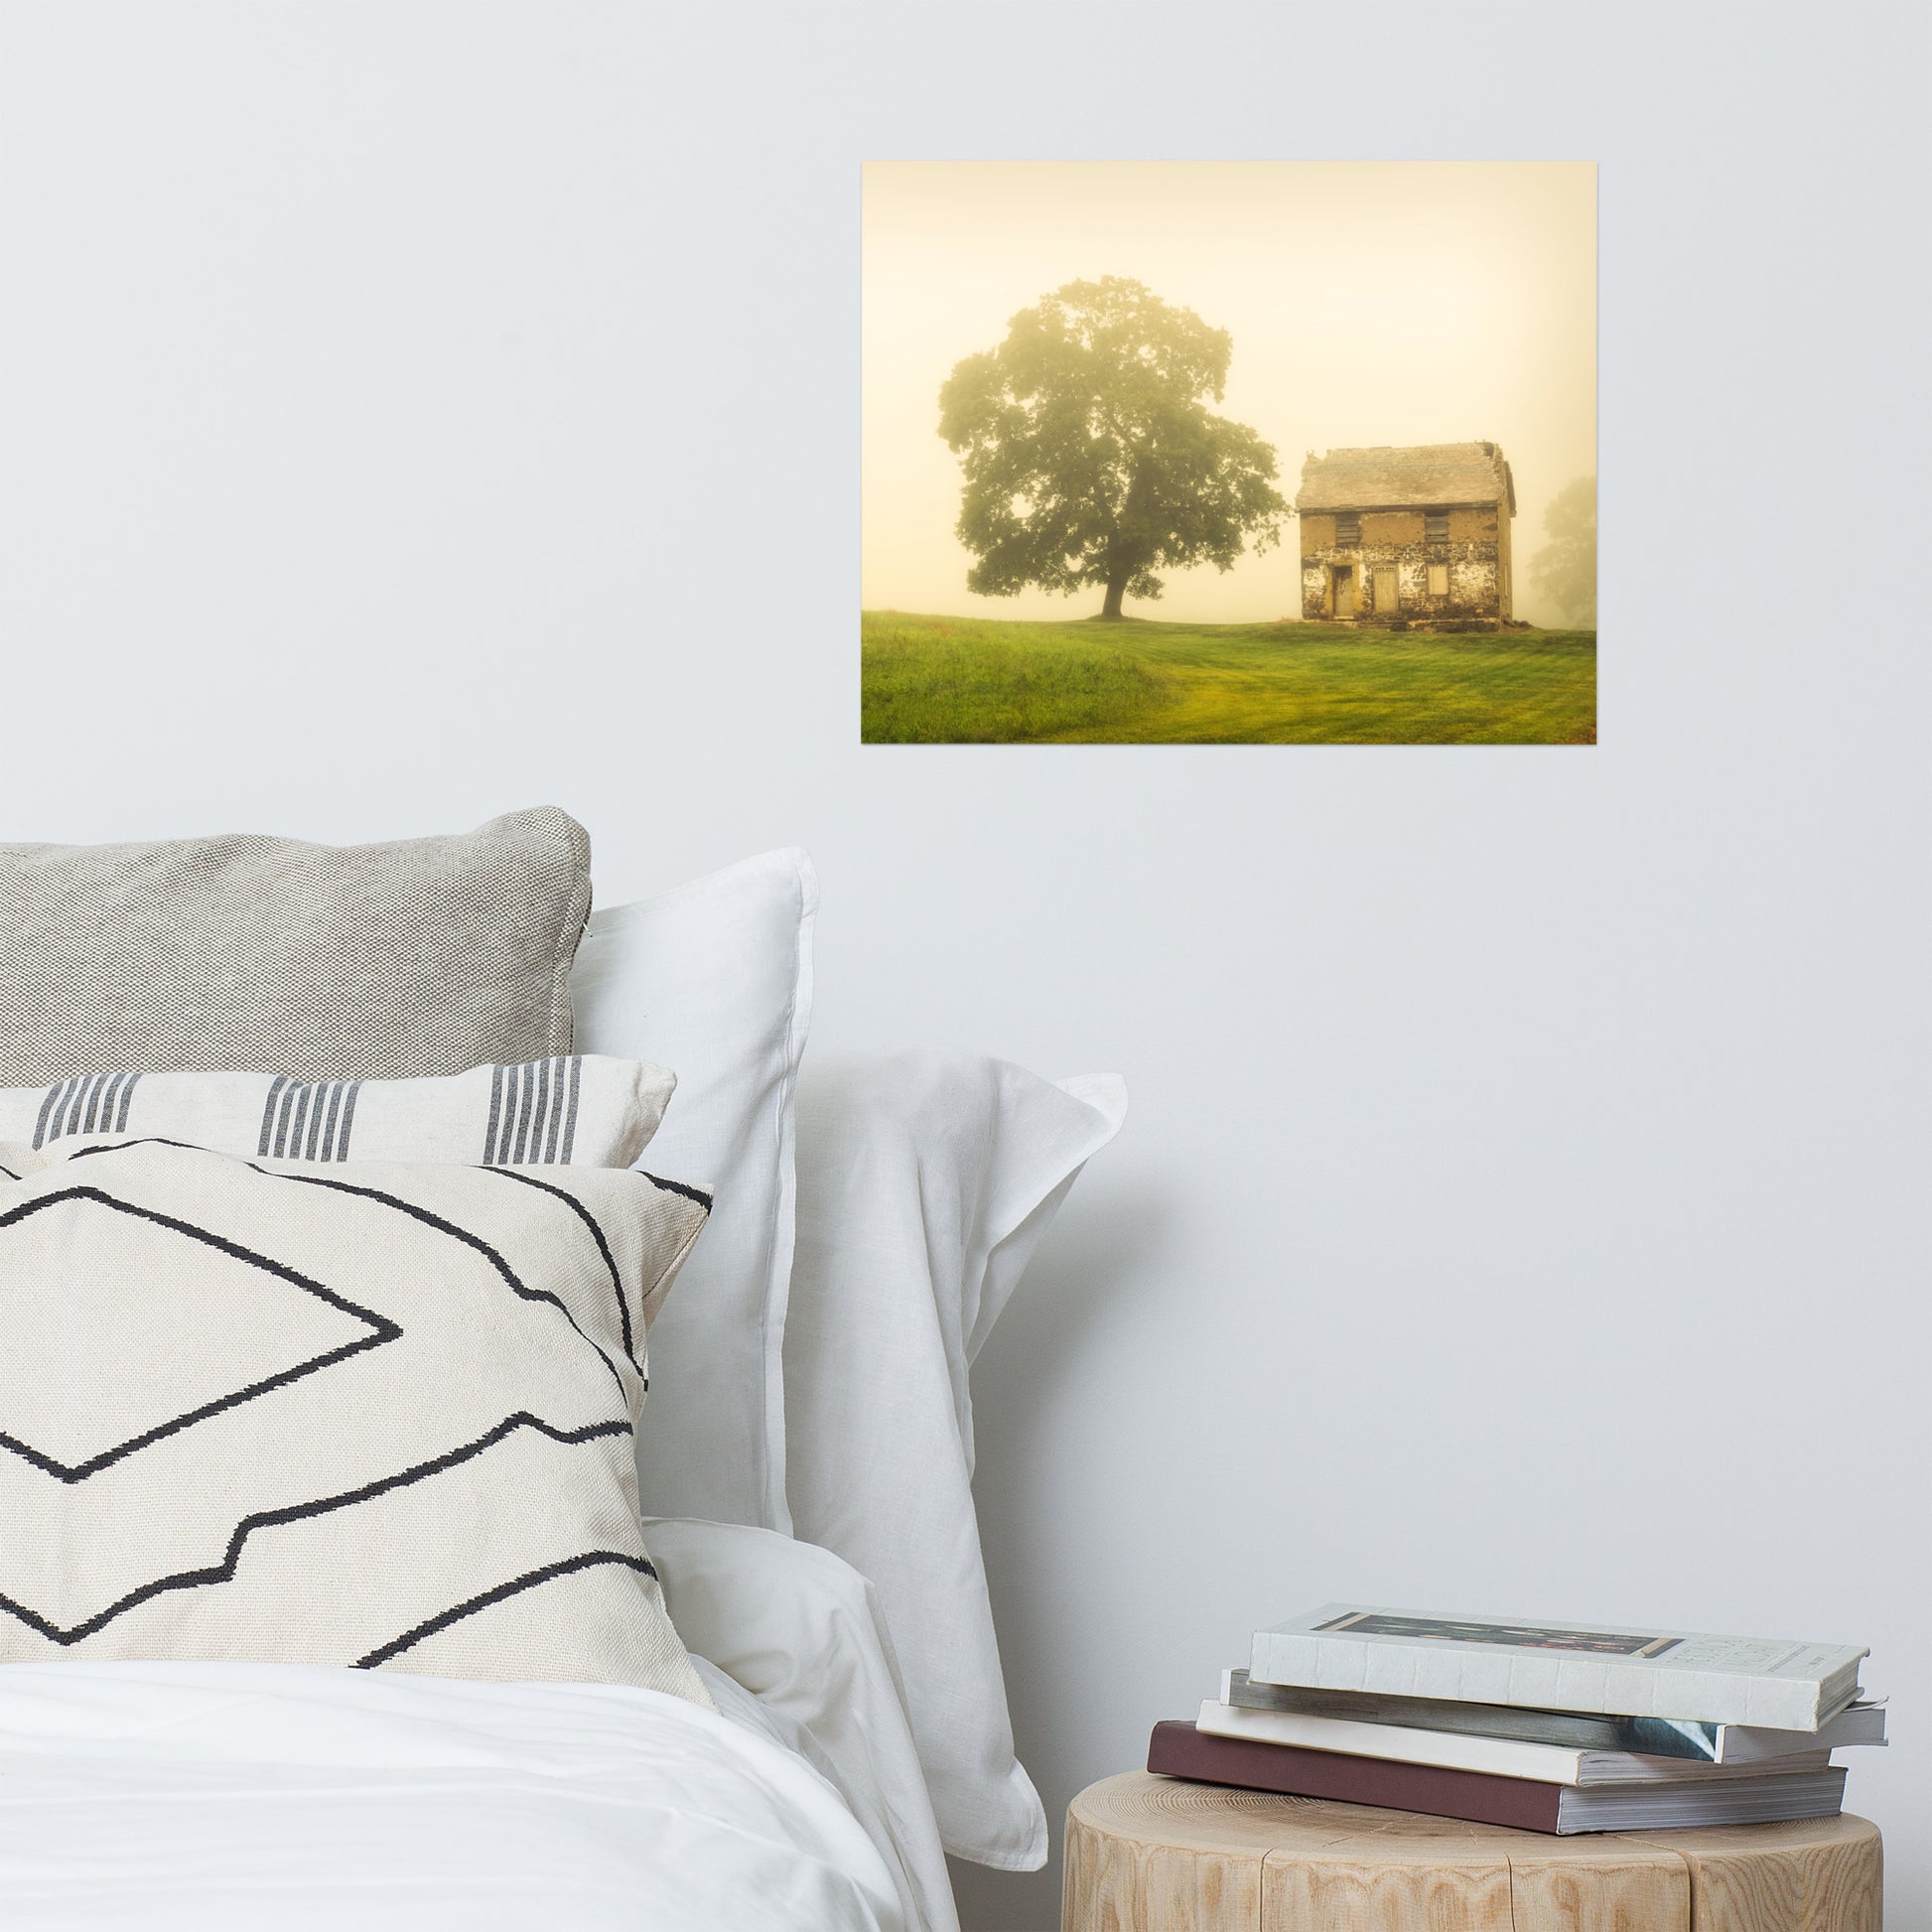 Cabin Bedroom Wall Decor: Old Farmhouse in Foggy Meadow Rustic - Rural / Country Style Landscape / Nature Photograph Loose / Unframed / Frameless / Frameable Wall Art Print - Artwork